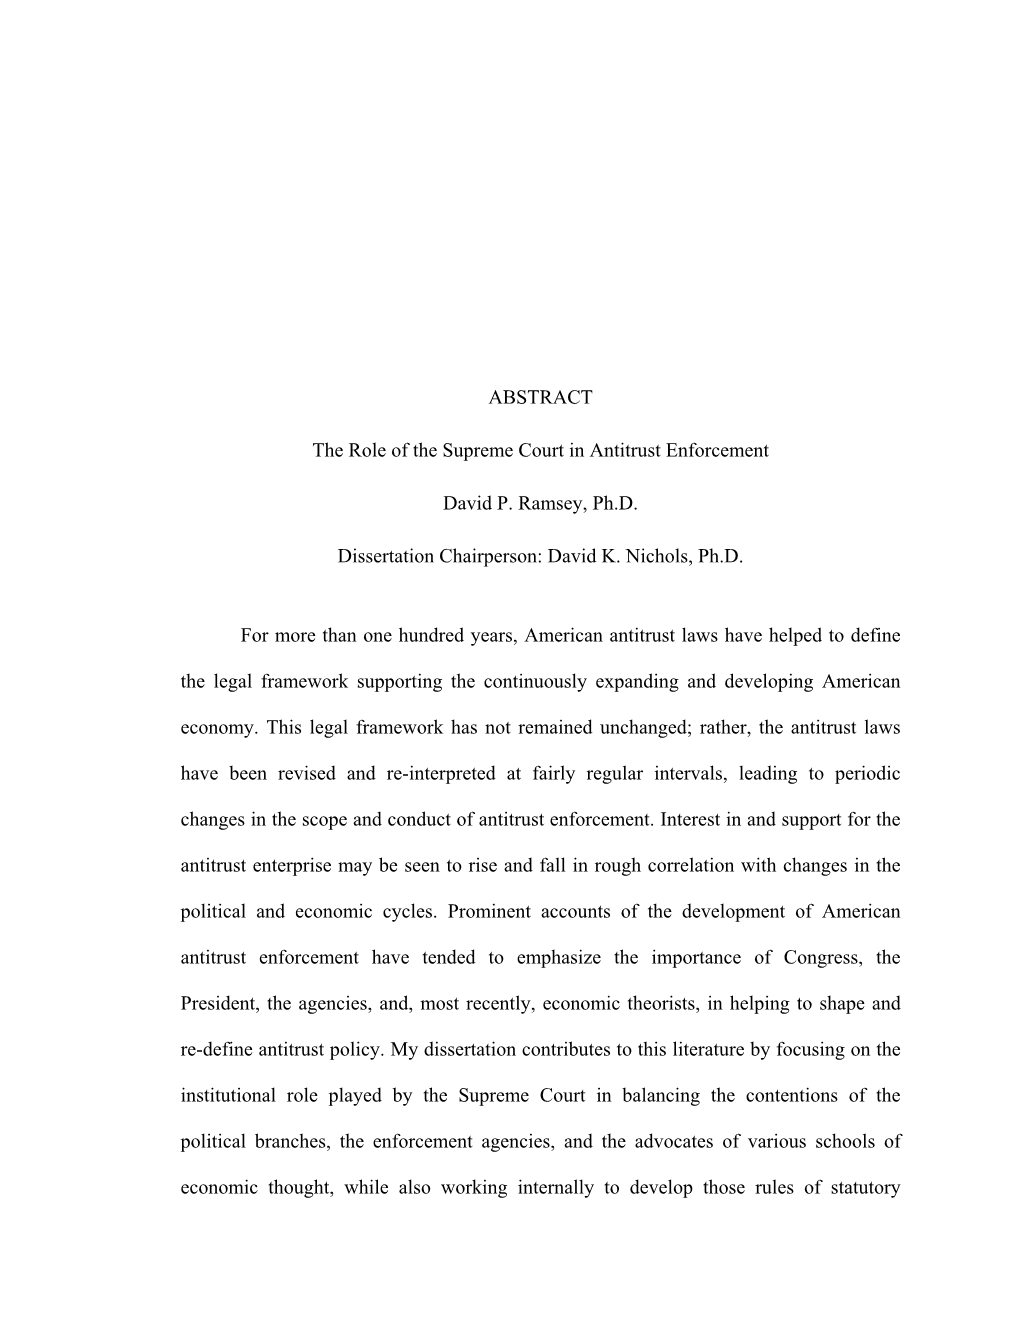 ABSTRACT the Role of the Supreme Court in Antitrust Enforcement